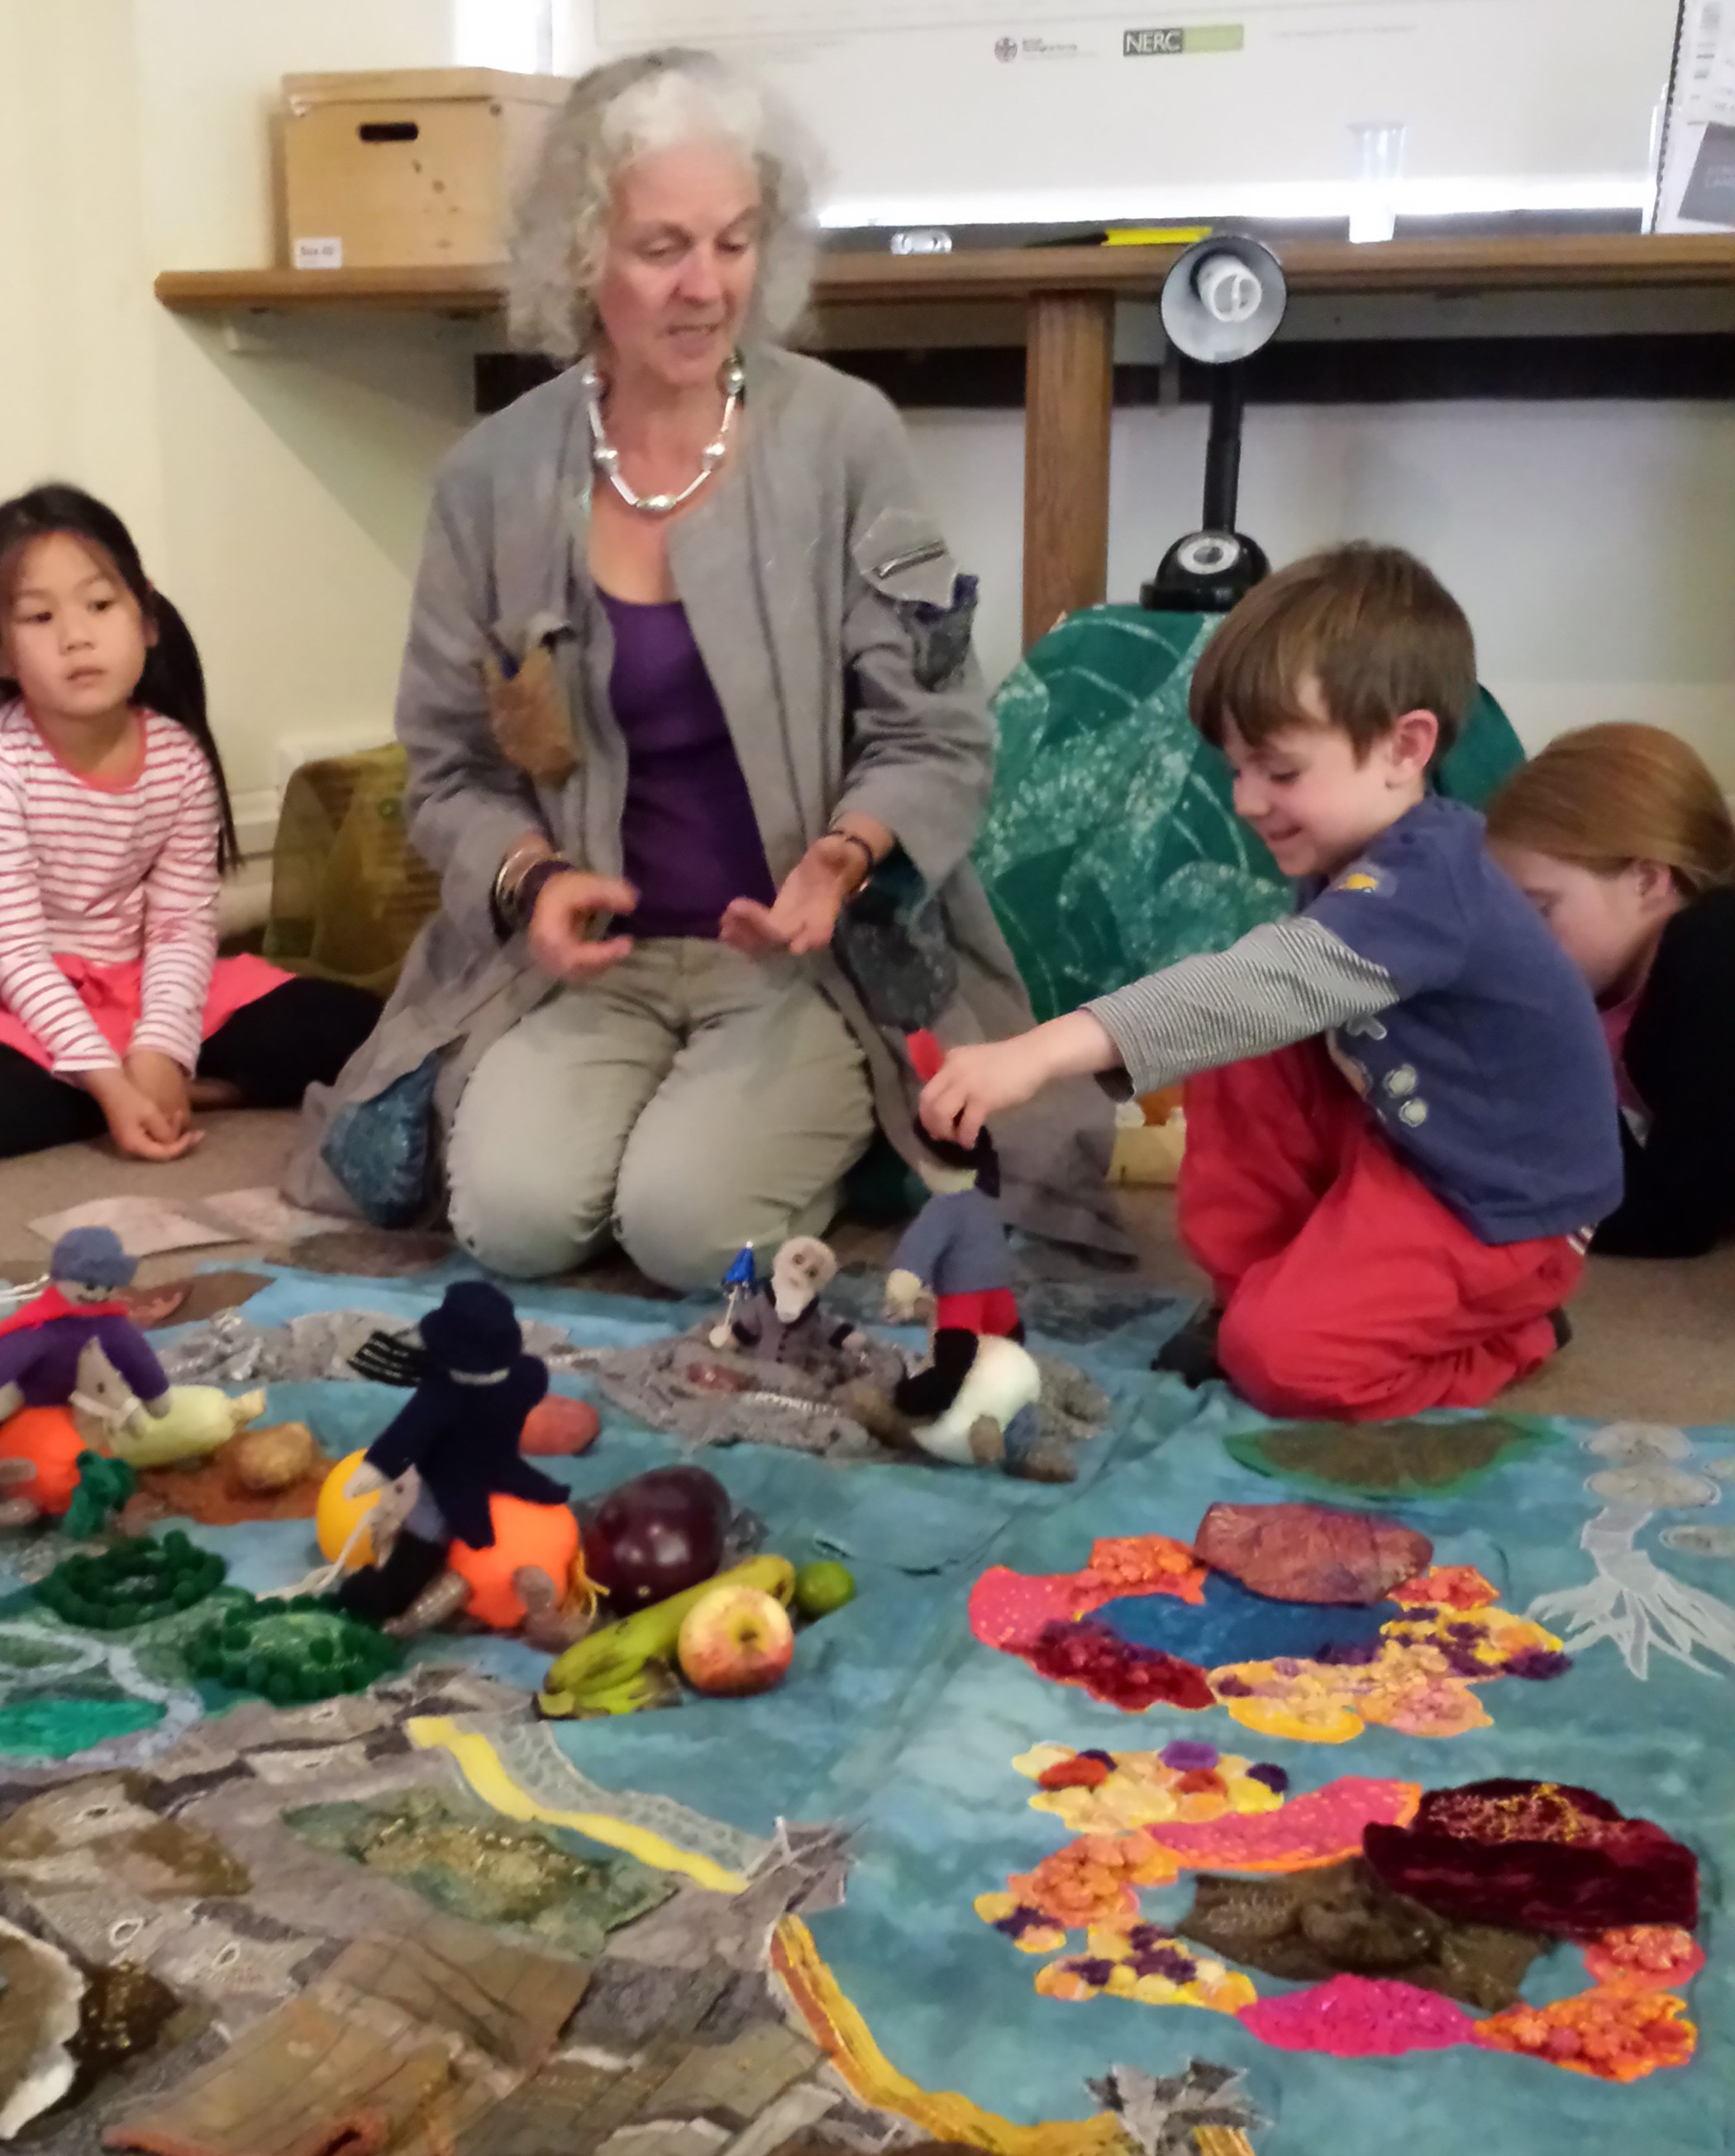 A photo of Marion engaging with and telling a story to small children on a colourful mat at a playgroup.